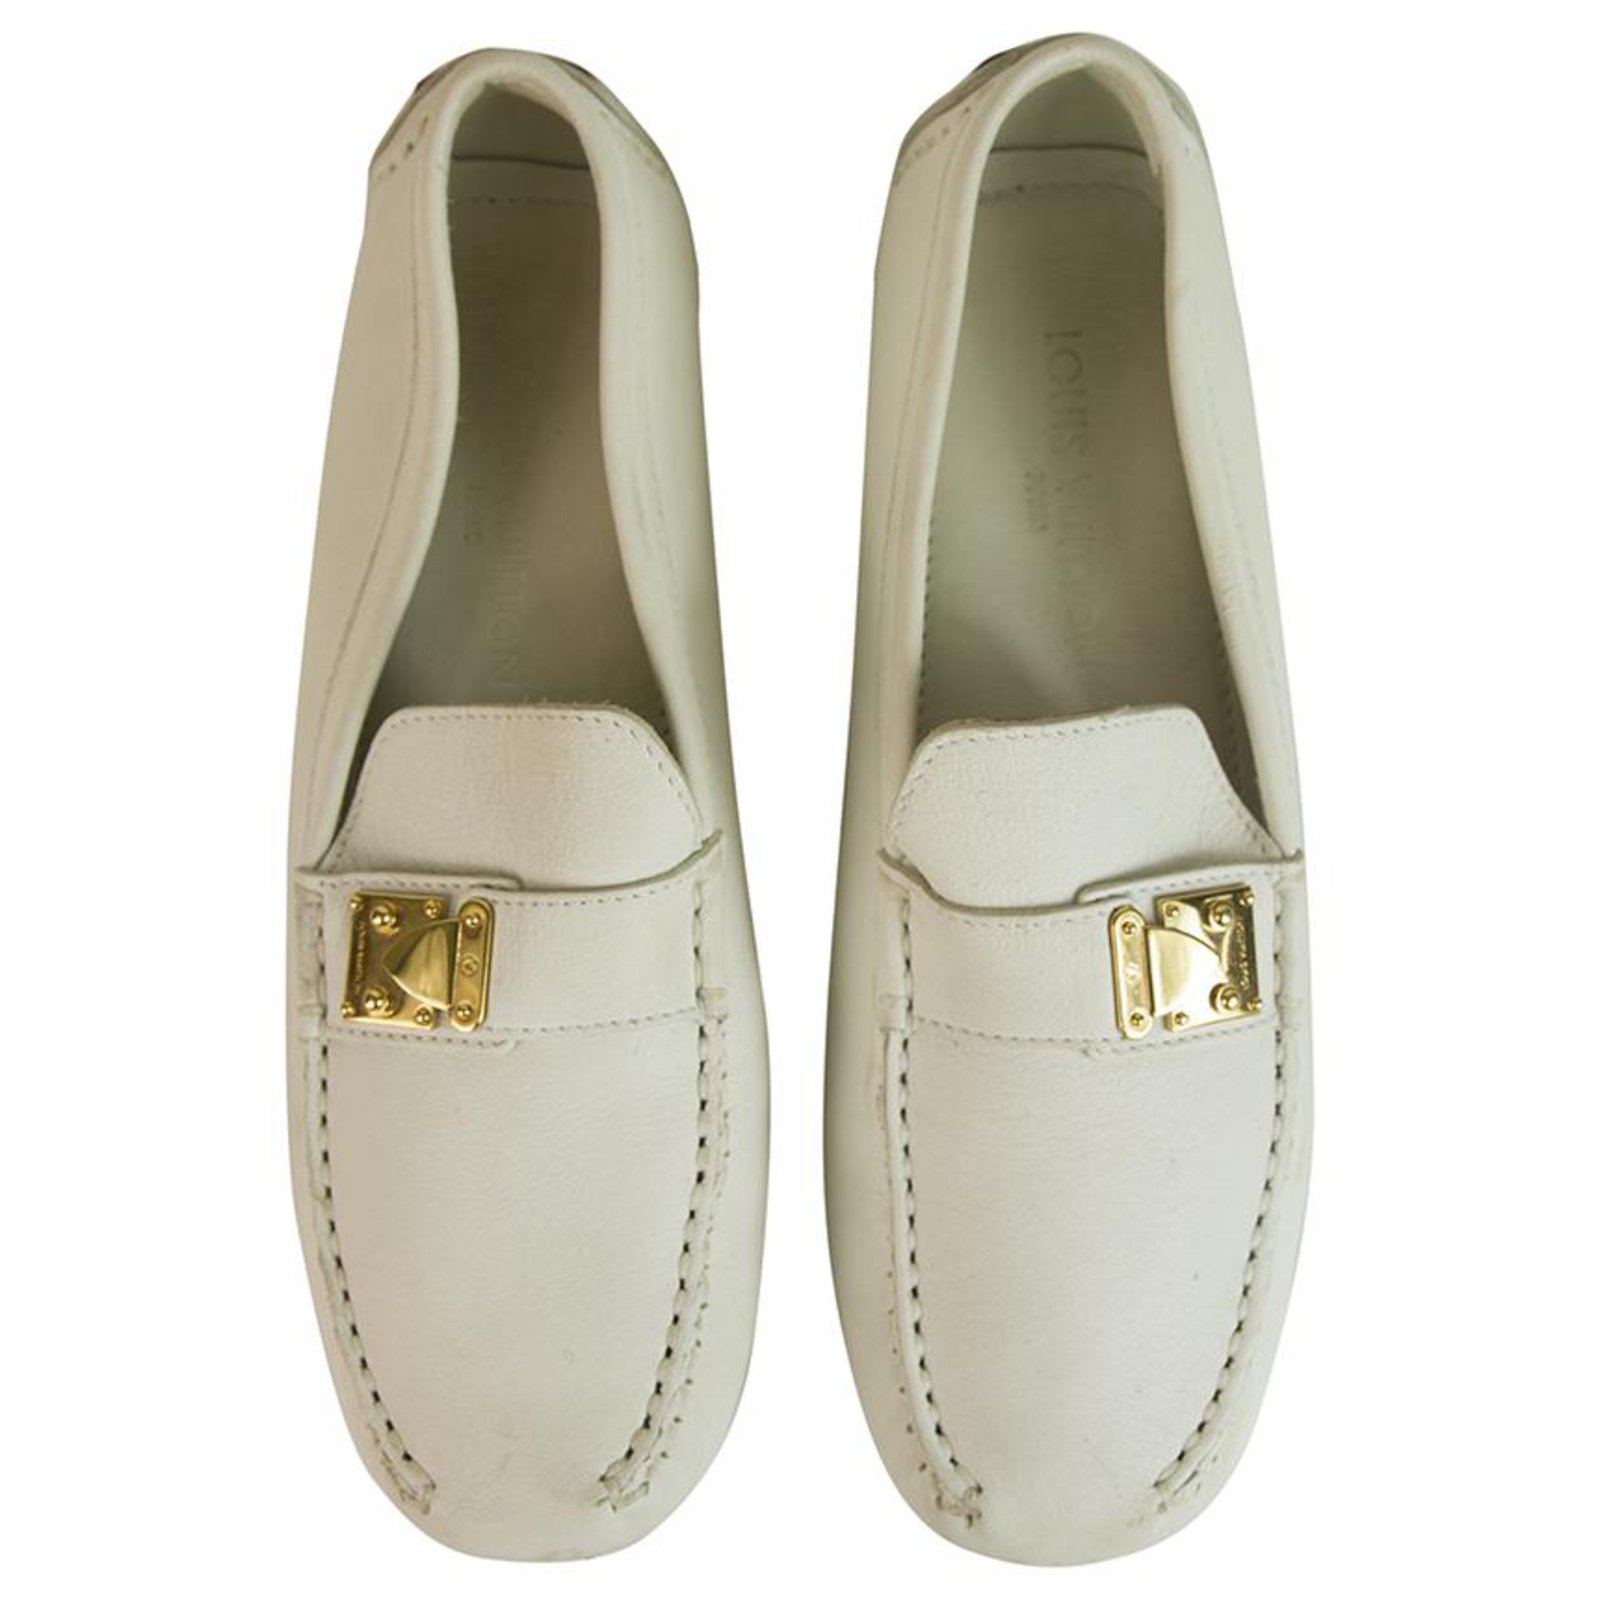 Louis Vuitton white leather loafers flats moccasins shoes gold tone buckle  37 ref.125931 - Joli Closet